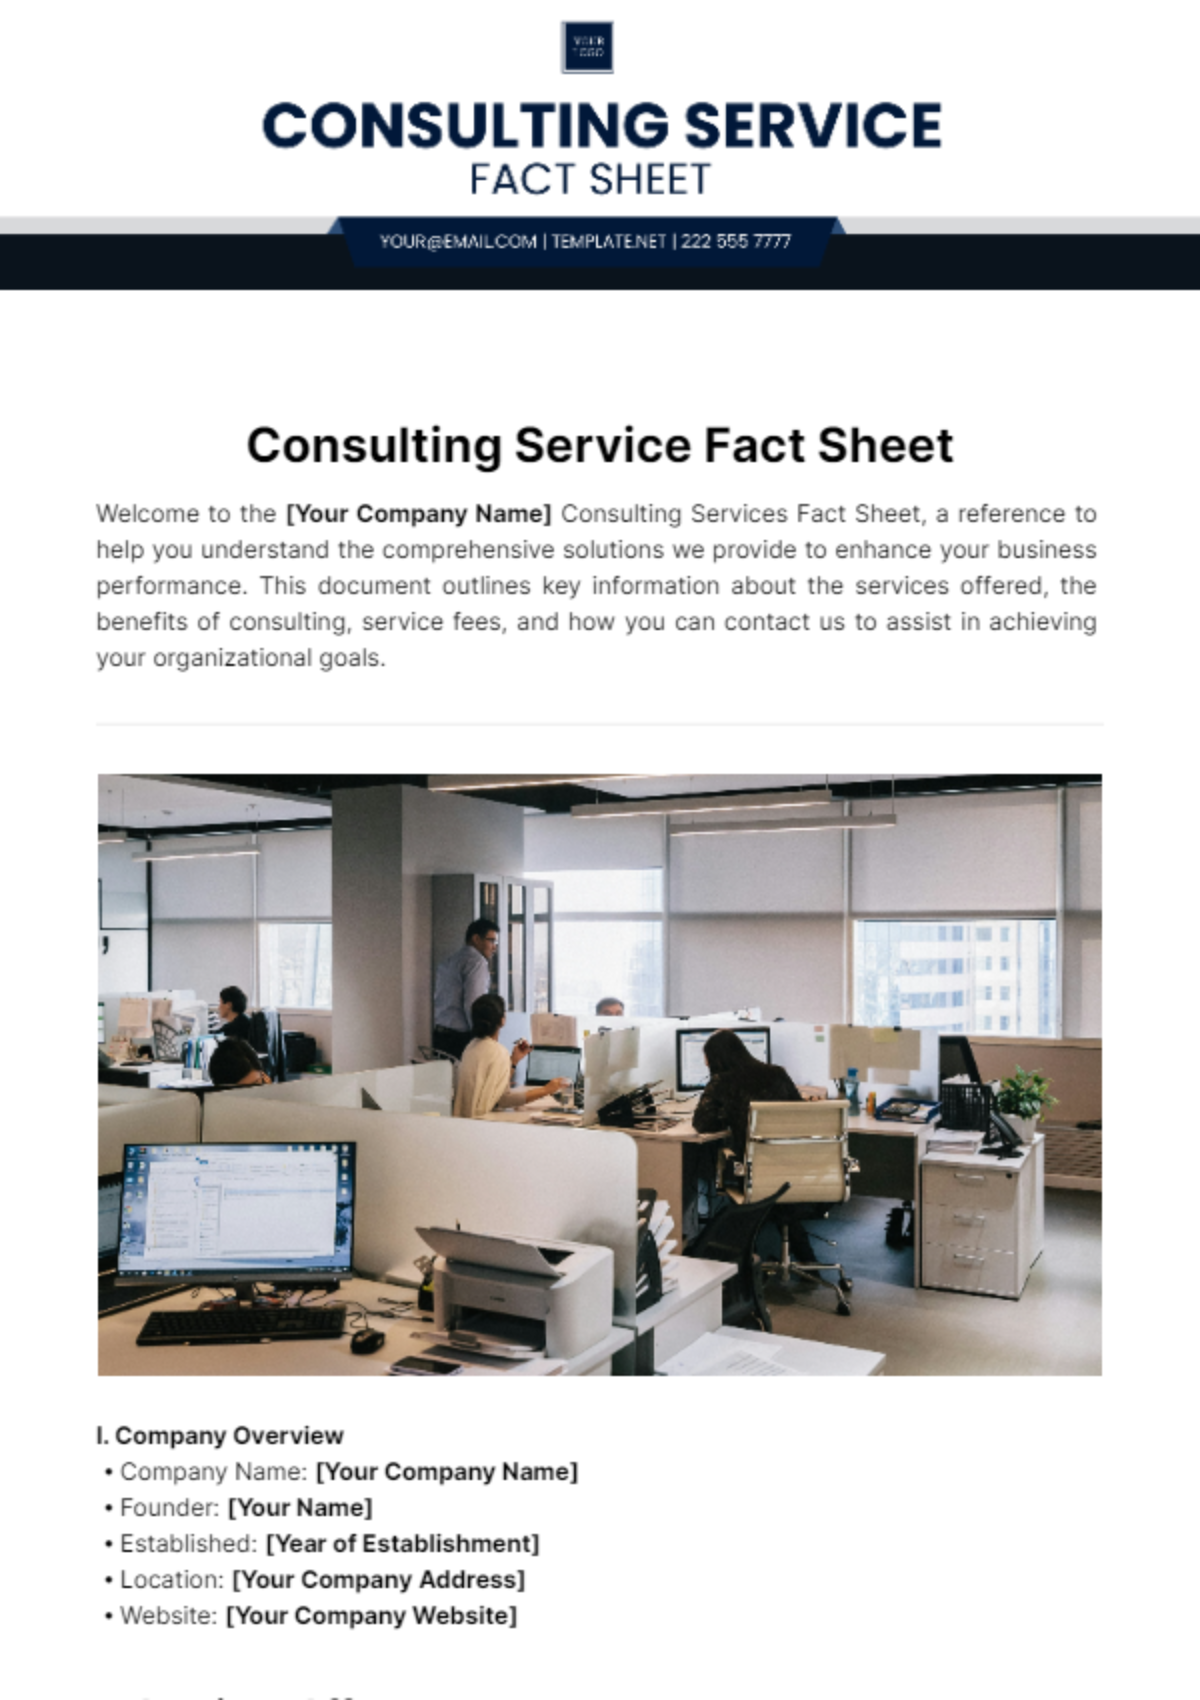 Consulting Service Fact Sheet Template